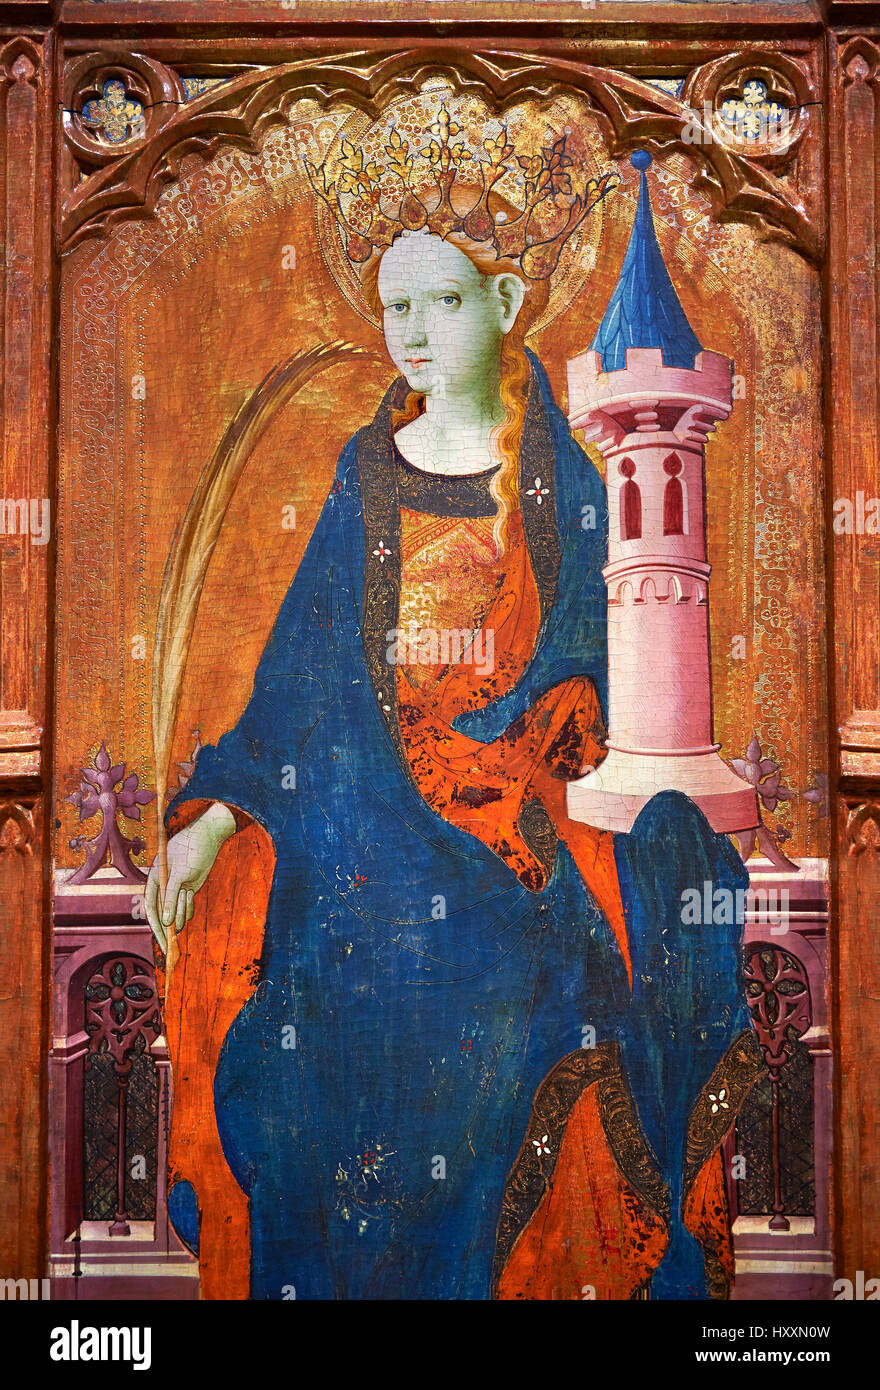 Gothic painted Panel Altarpiece of Saint Barbara by Goncal Peris Sarria. Tempera and gold leaf on wood. Date Circa 1410-1425.MNAC  inv no: 035672-CJT Stock Photo